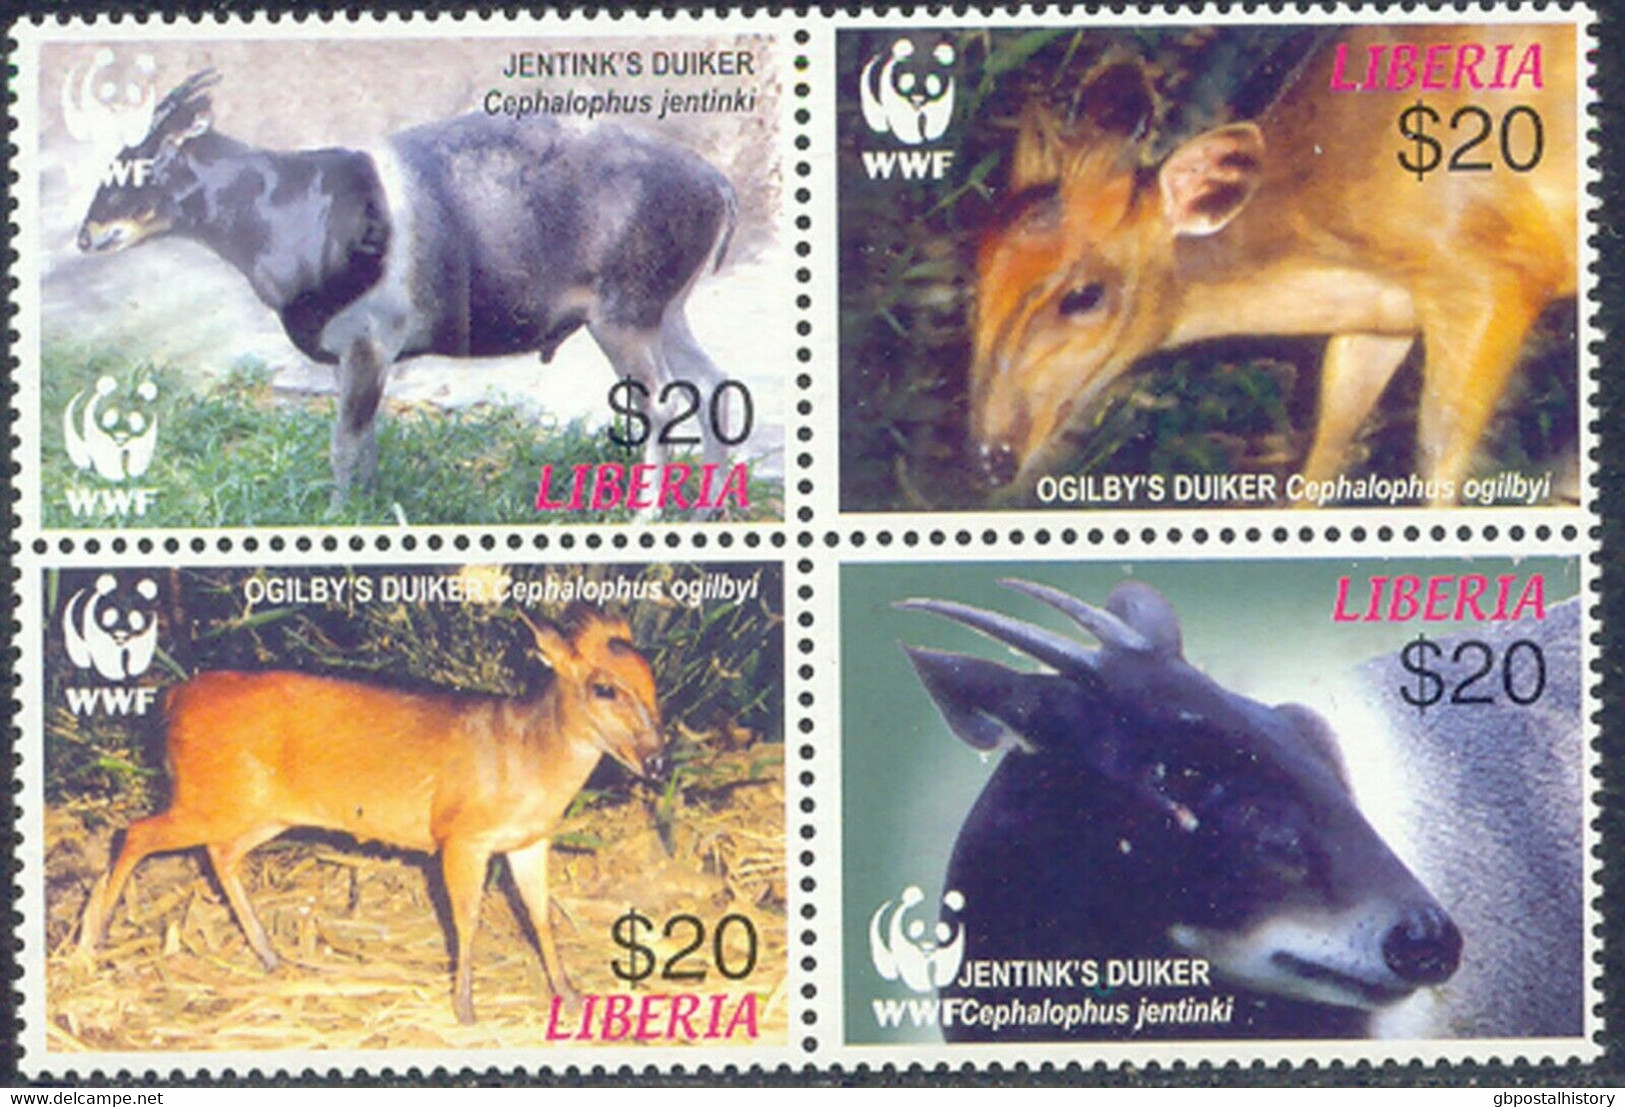 LIBERIA 2005 World Wide Fund For Nature (WWF), Jentink's Duiker ** DOUBLE PRINT - Liberia